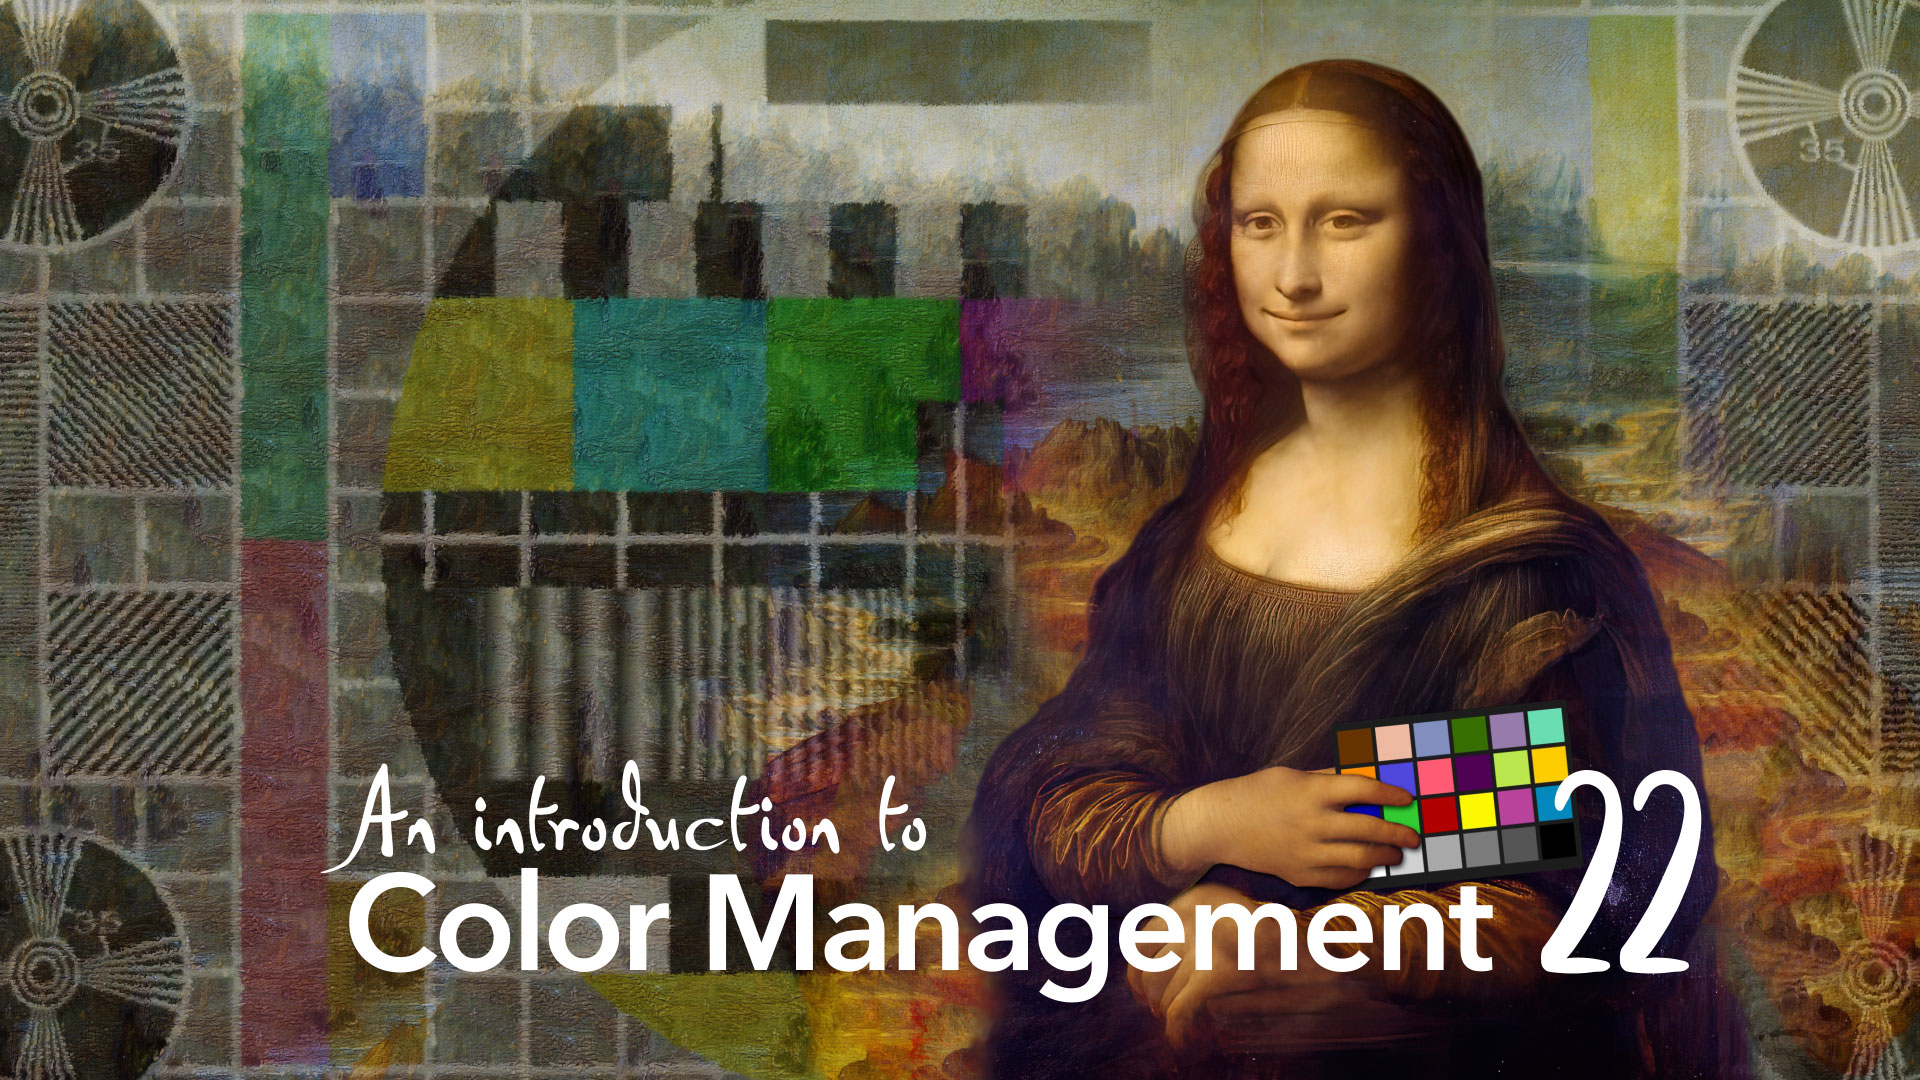 Color Management Part 22: Introducing Tone Mapping 9